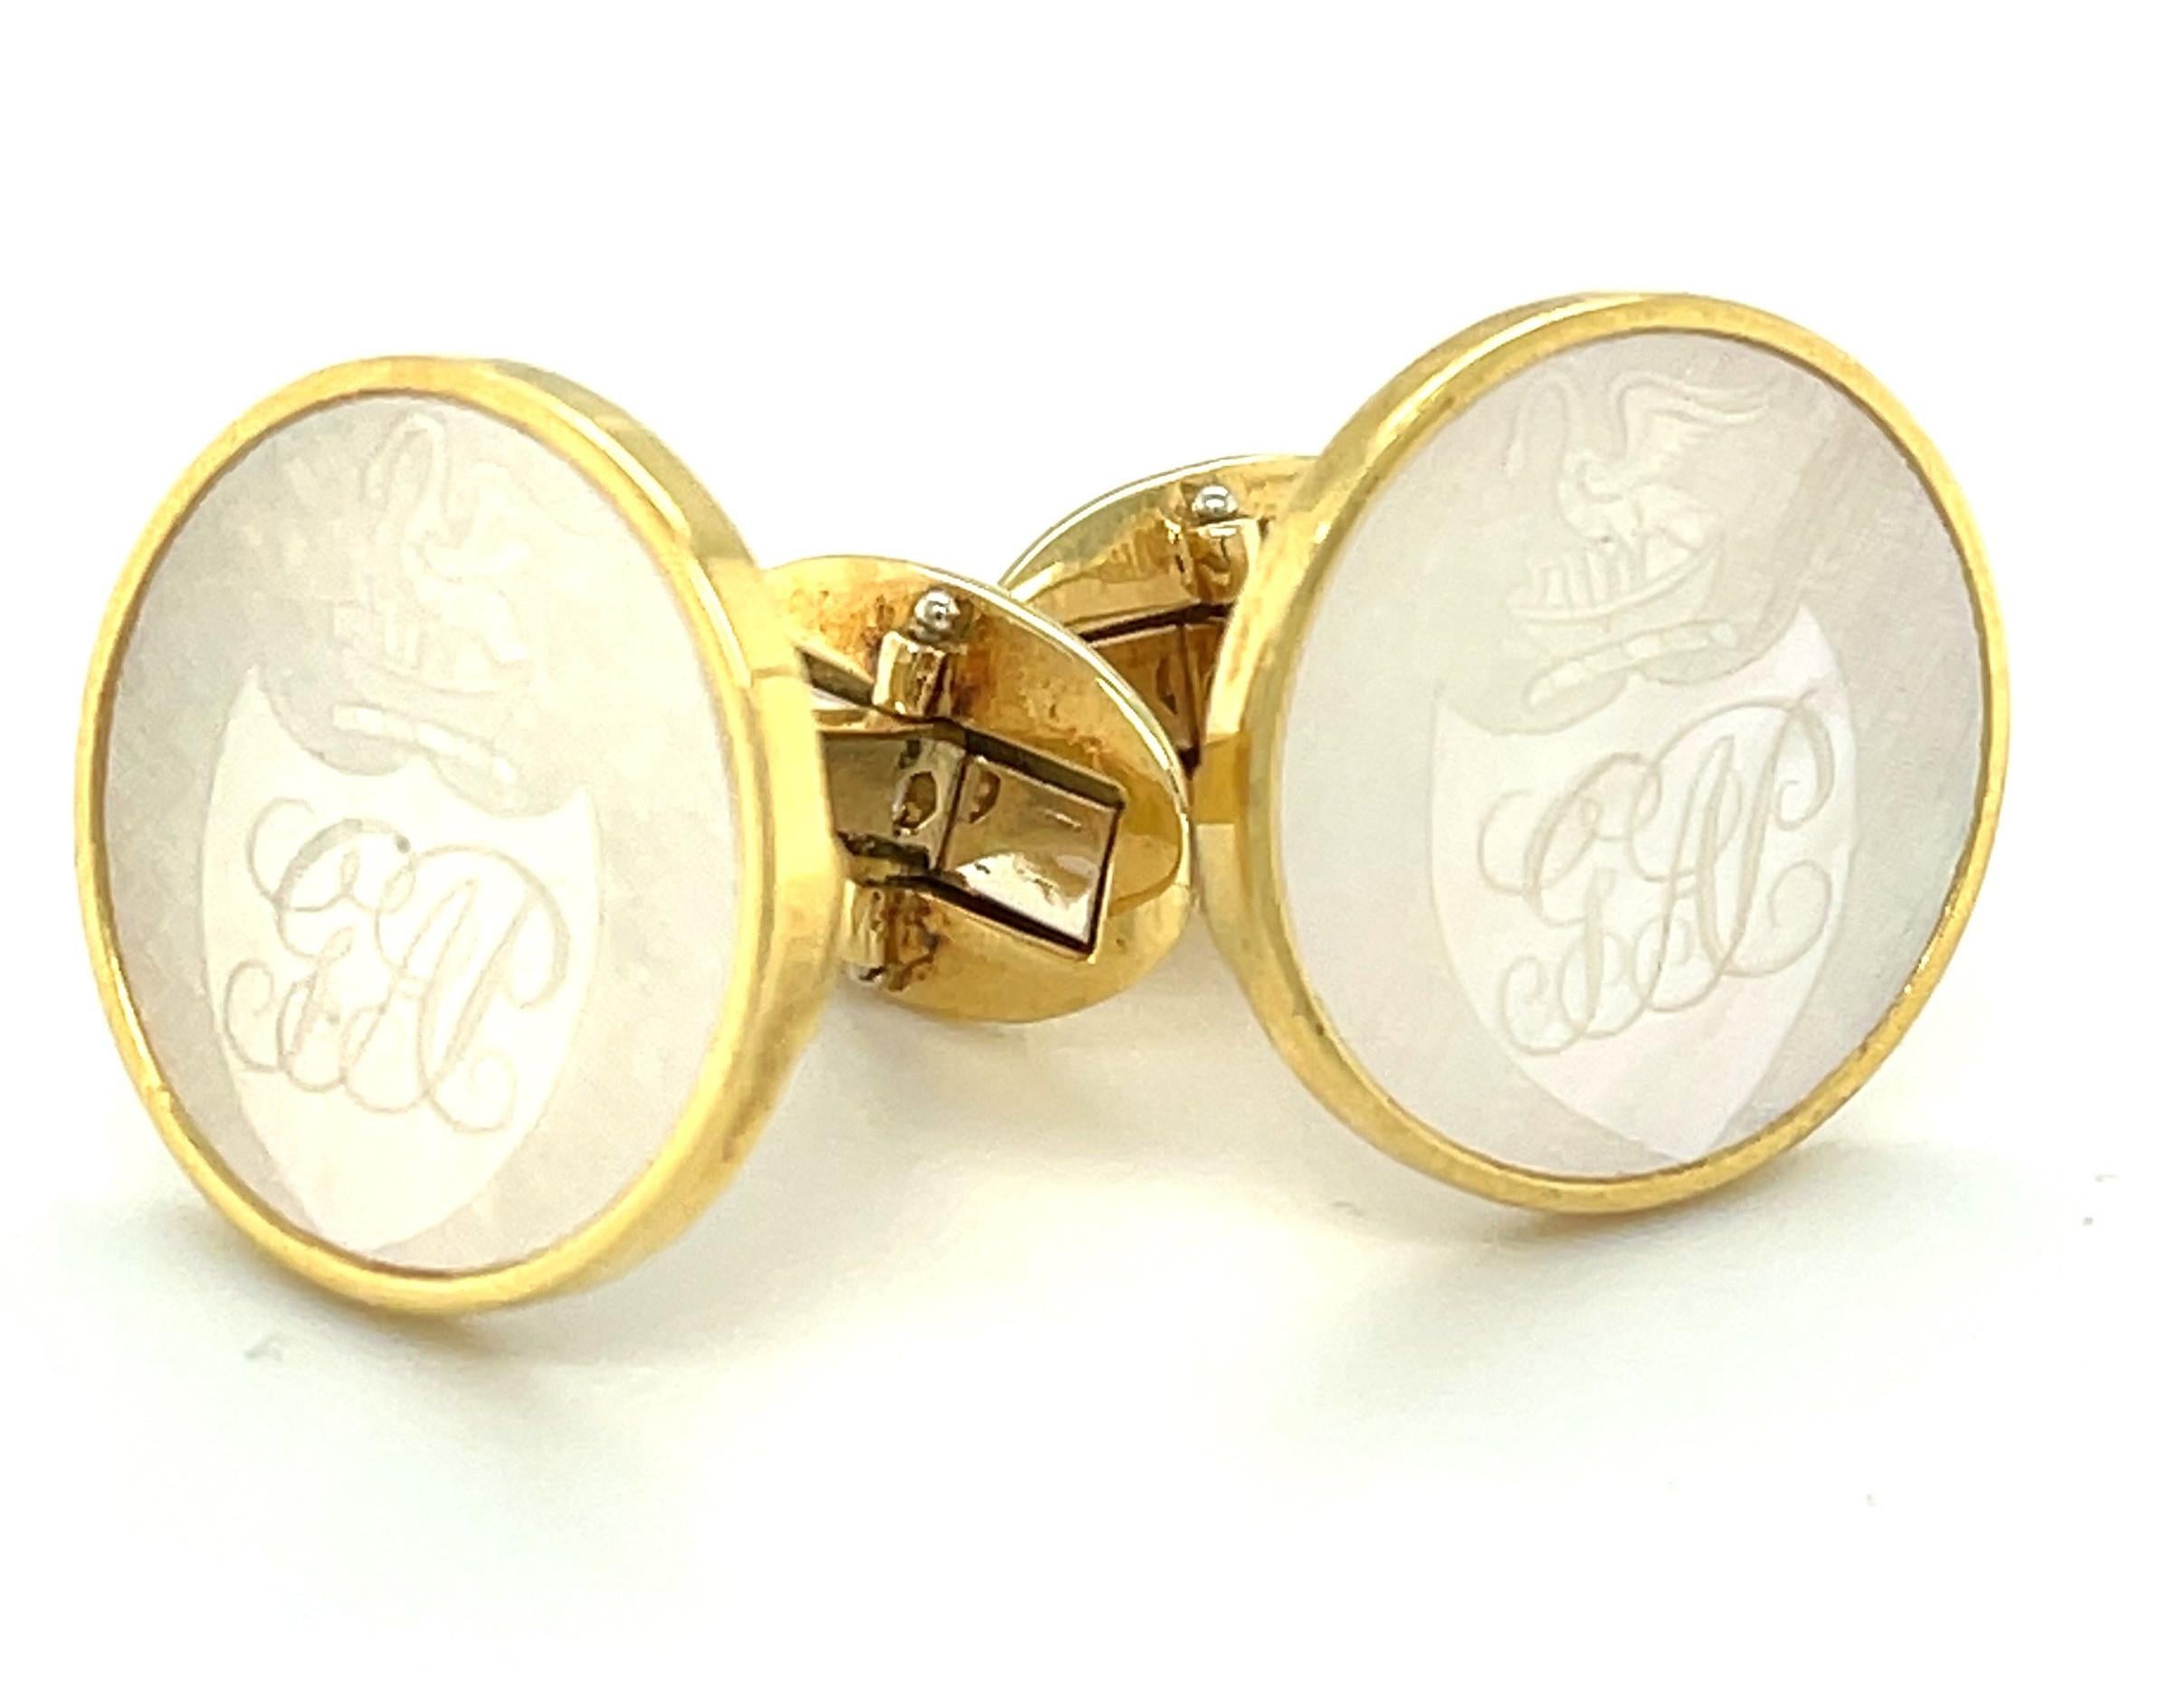 These handsome mother-of-pearl and 18k yellow gold cufflinks feature a gorgeous matching pair of antique gaming counters that were hand-engraved in the 1800's. Originally carved in China and used by the British the way we use poker chips, these